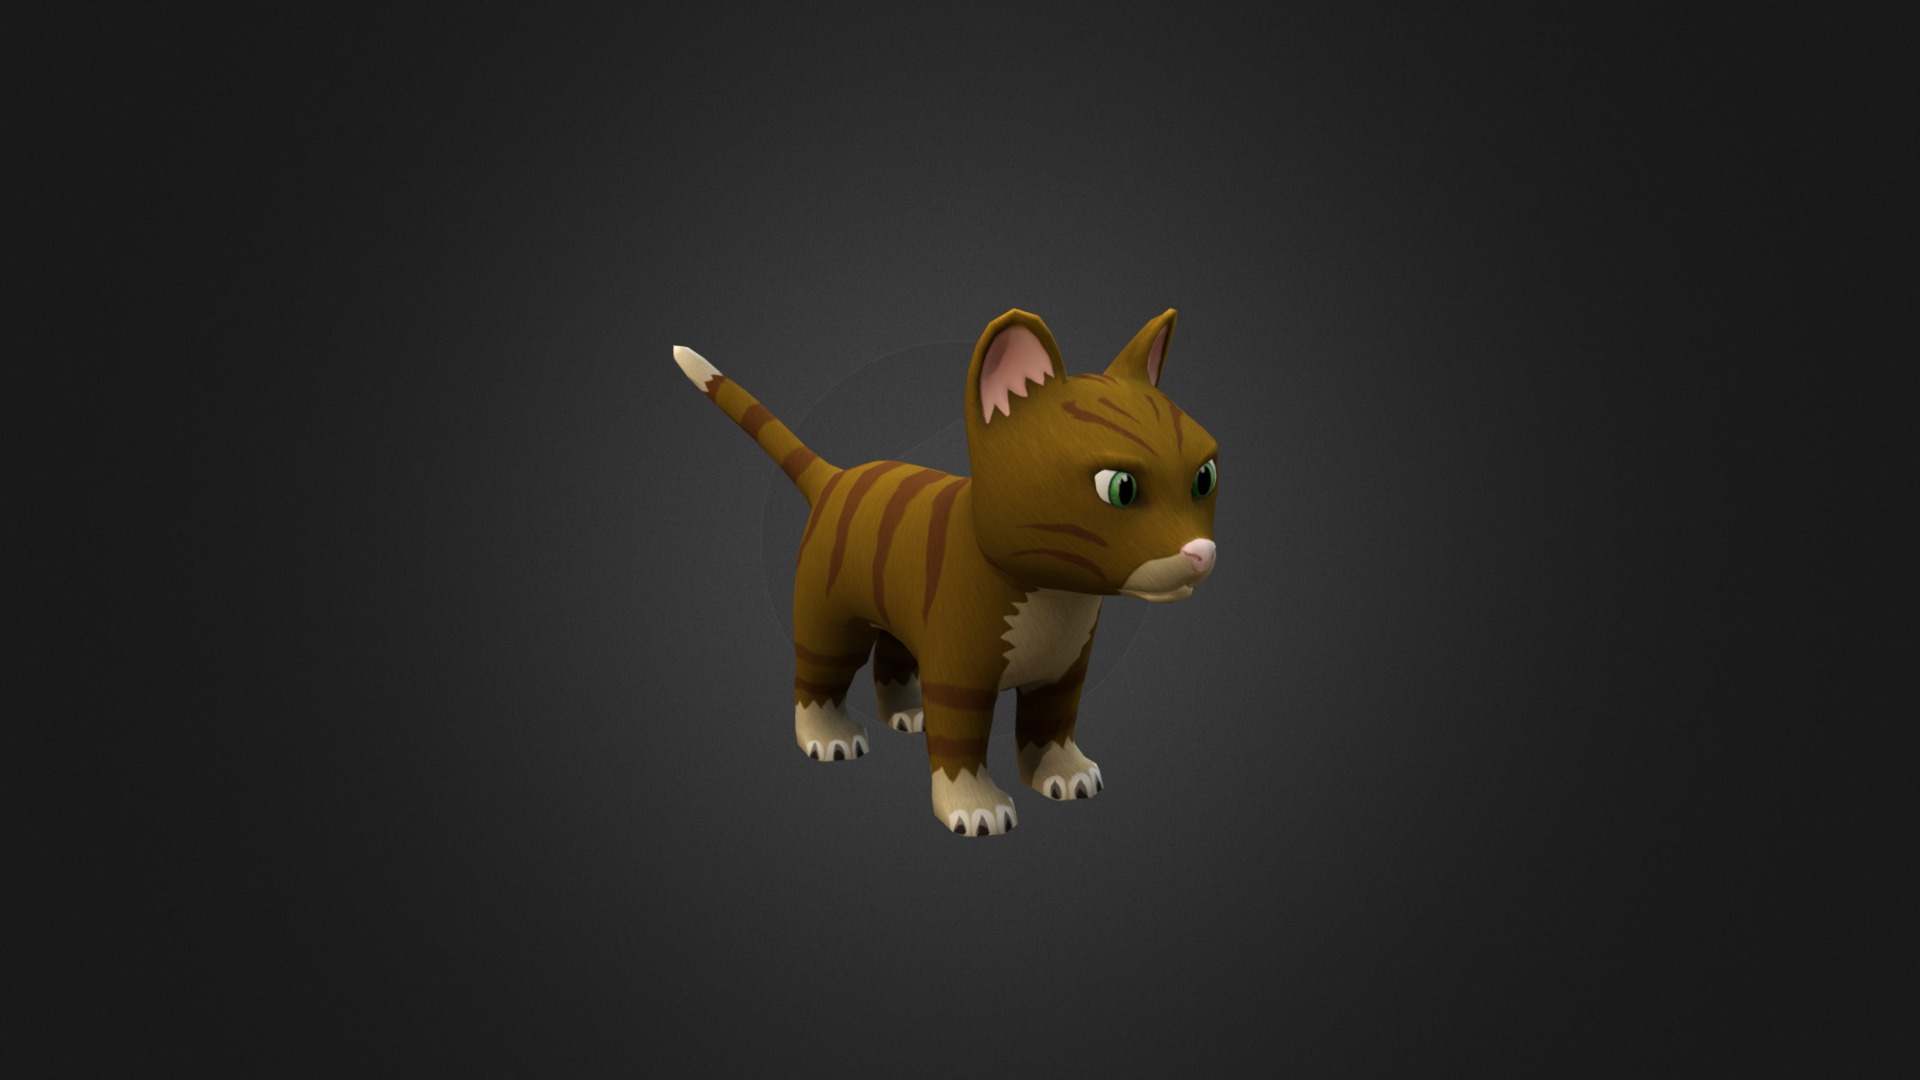 3D model LittleCat - This is a 3D model of the LittleCat. The 3D model is about a small yellow cat.